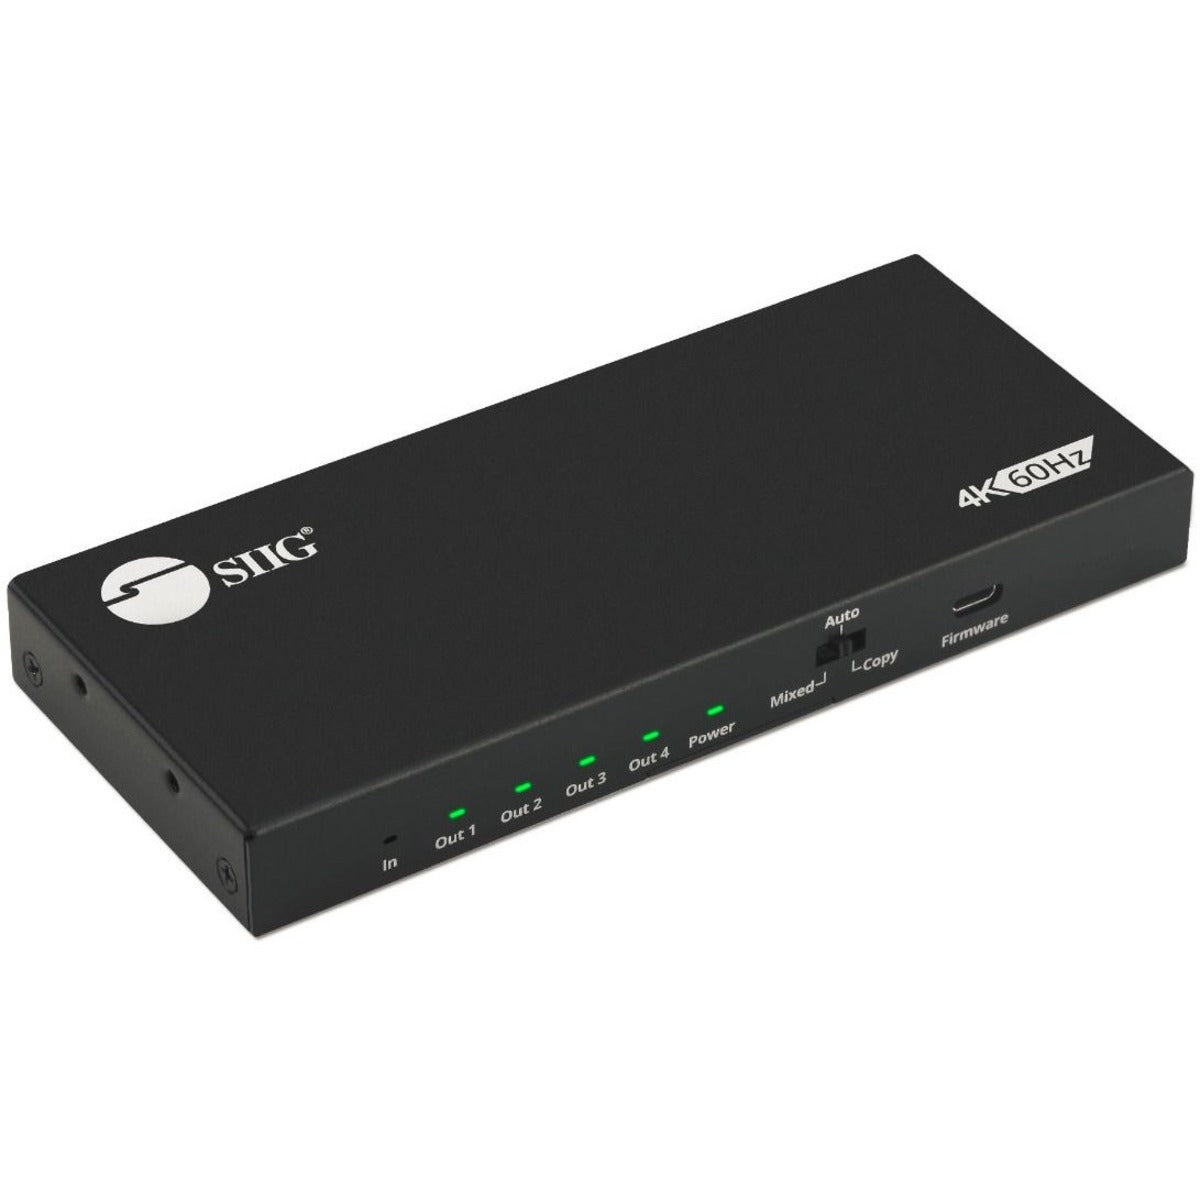 SIIG CE-H26C11-S1 4 Port HDMI 2.0 HDR Splitter with EDID and Downscaler, 4K Video Resolution, 2-Year Warranty